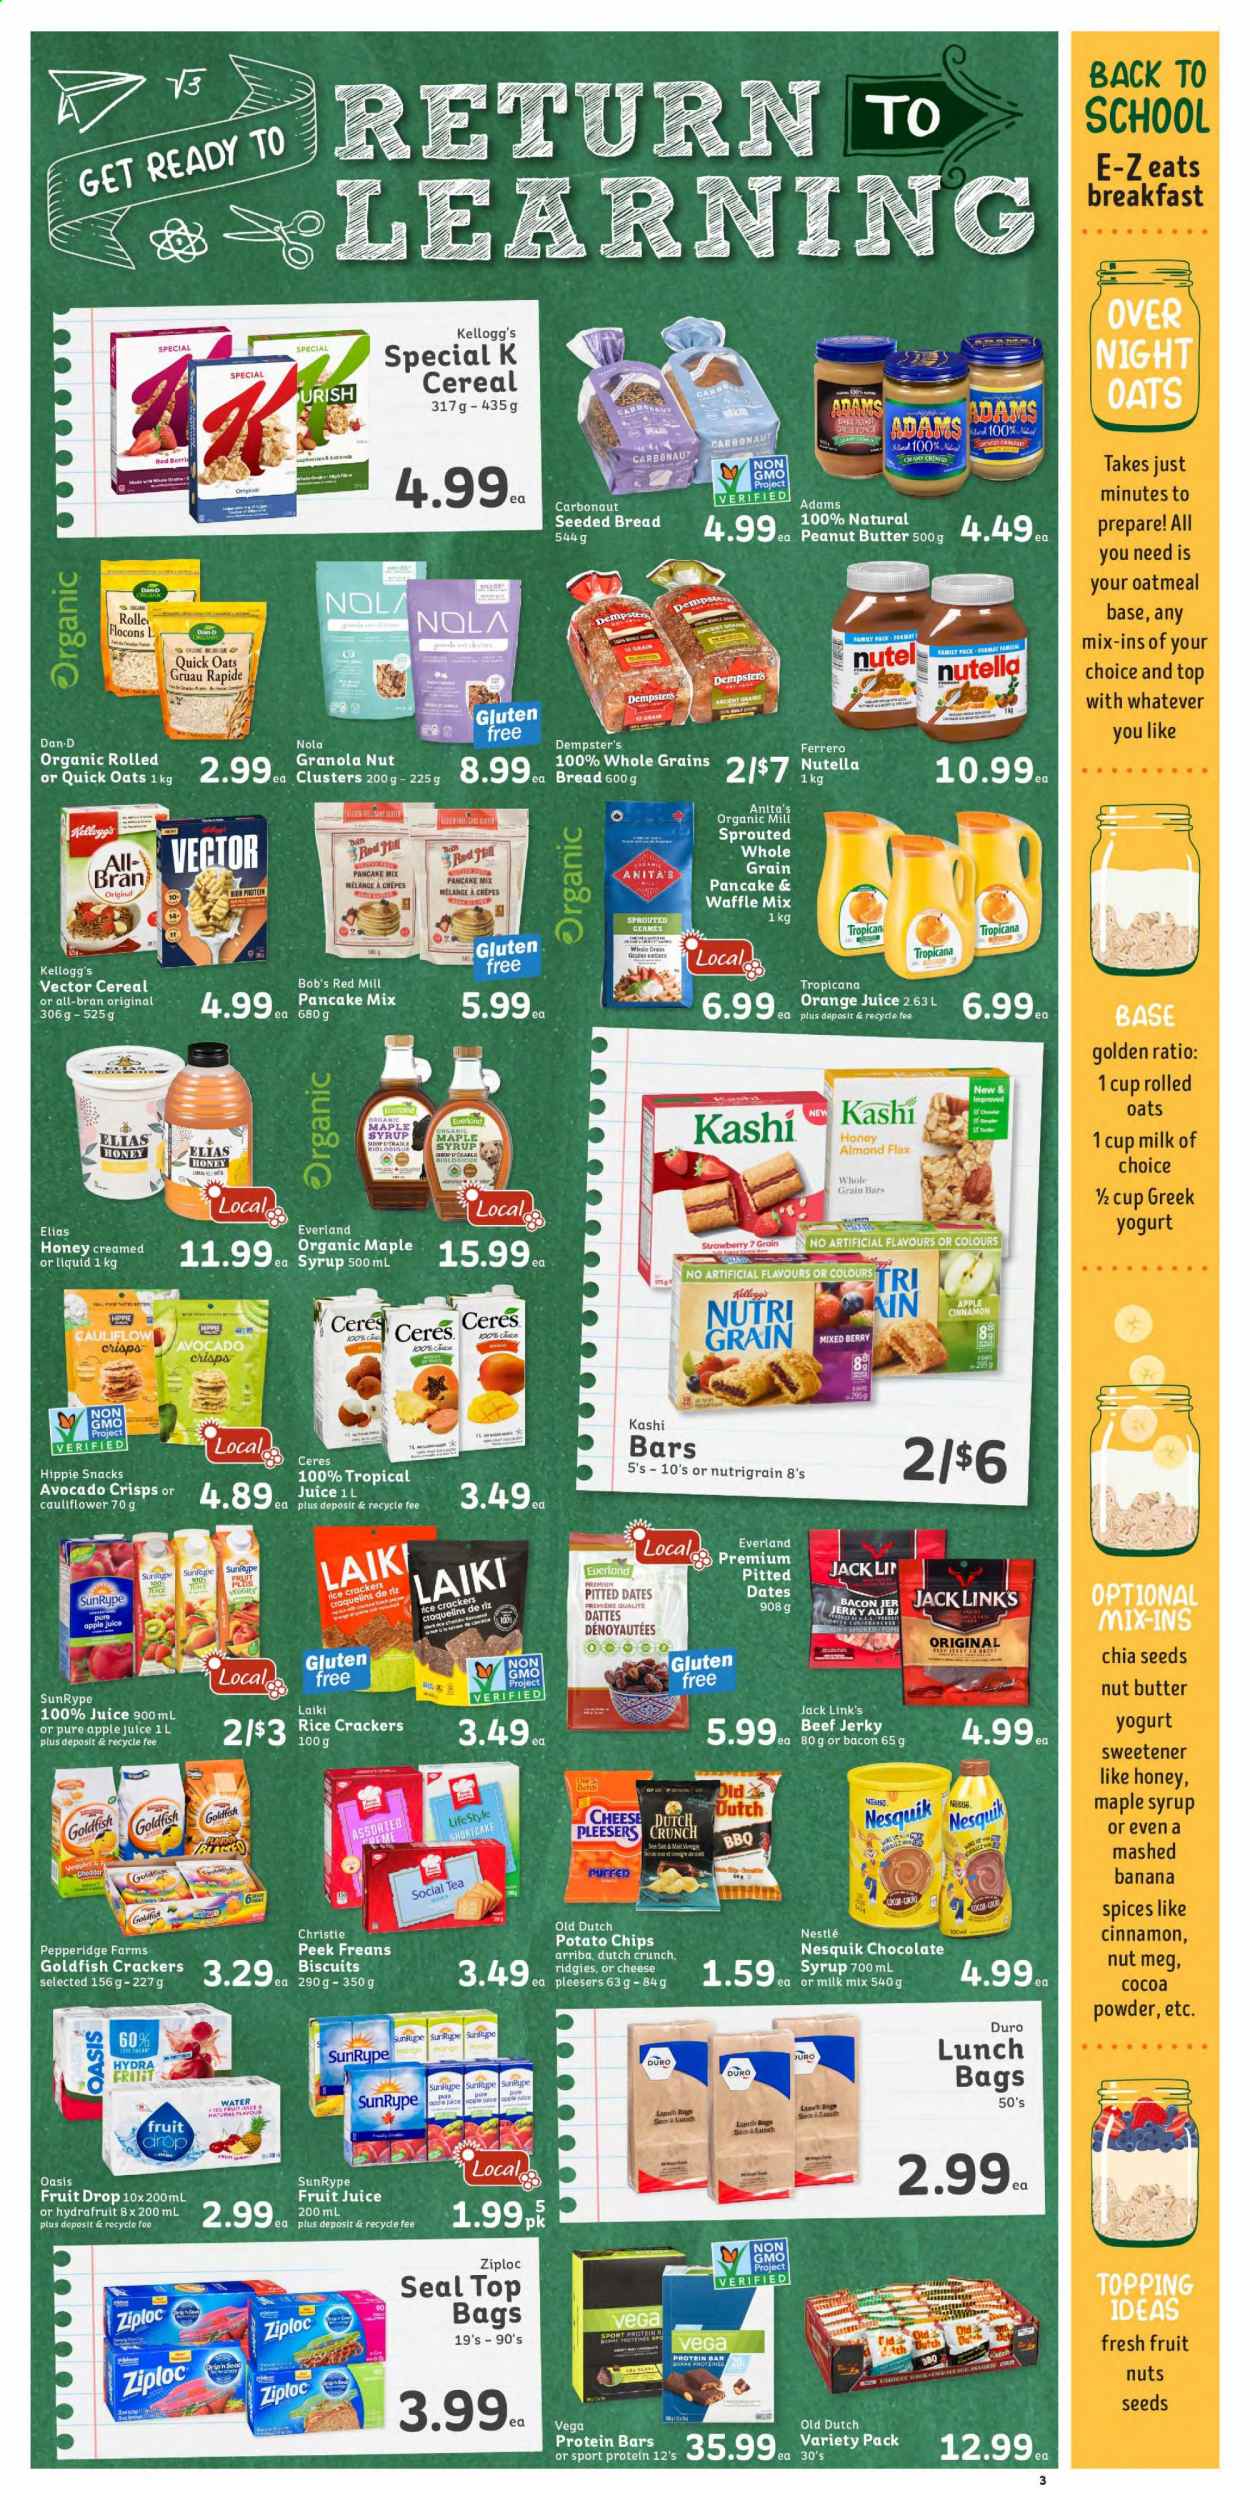 thumbnail - IGA Simple Goodness Flyer - August 27, 2021 - September 02, 2021 - Sales products - bread, avocado, pancakes, bacon, beef jerky, jerky, snack, crackers, Kellogg's, biscuit, potato chips, rice crackers, Goldfish, Jack Link's, cocoa, sugar, oatmeal, oats, topping, sweetener, cereals, rolled oats, protein bar, Quick Oats, Nutri-Grain, All-Bran, chia seeds, cinnamon, maple syrup, peanut butter, chocolate syrup, syrup, nut butter, dried fruit, dried dates, apple juice, orange juice, juice, fruit juice, Cerés, tea, Nesquik, Nestlé, granola, Nutella, chips. Page 3.